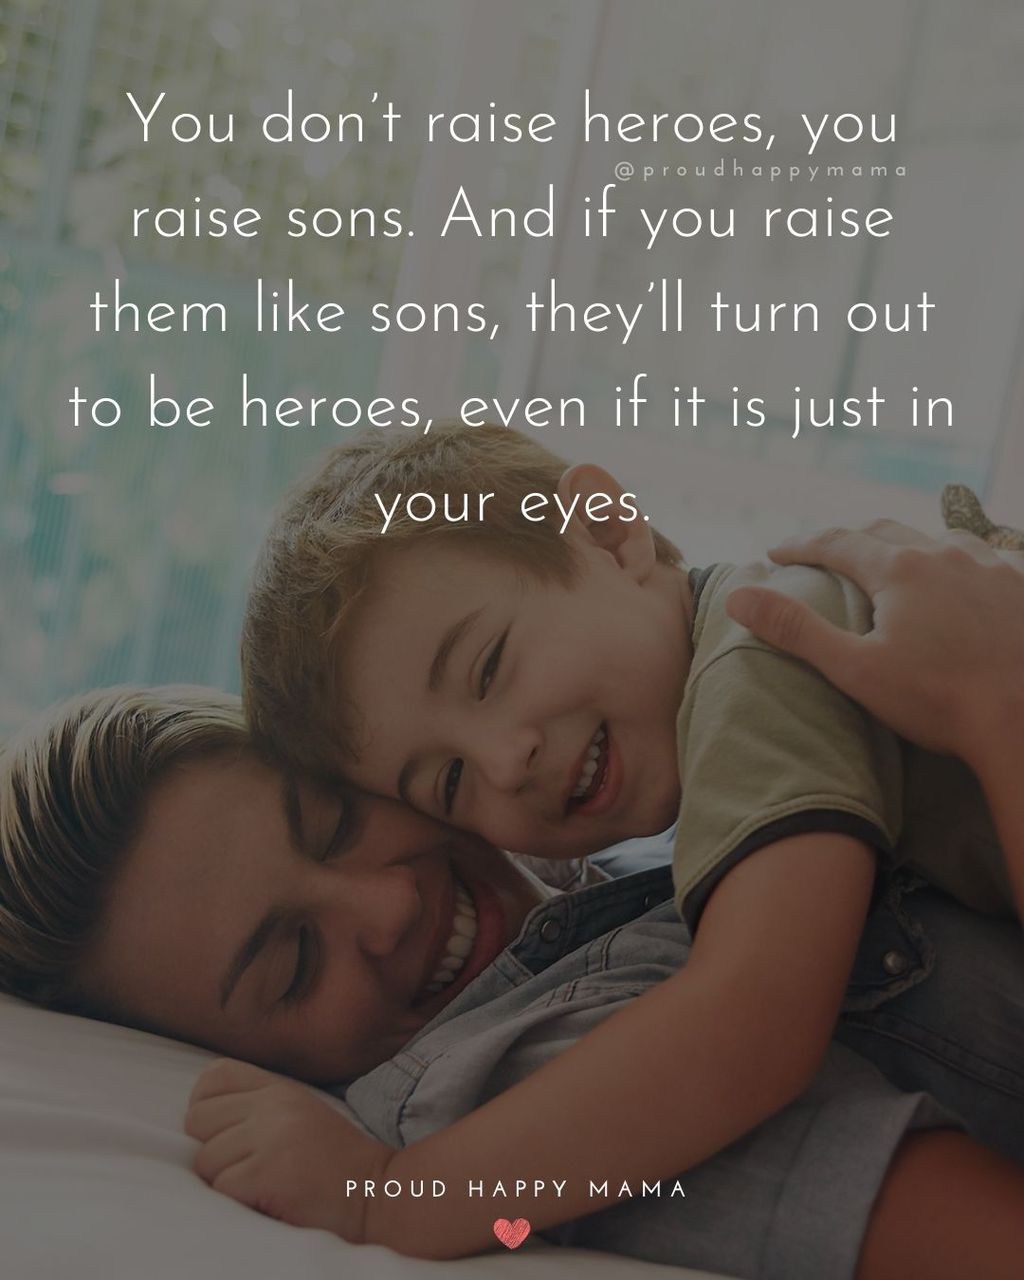 Boy mom Quotes - You dont raise heroes, you raise sons. And if you raise them like sons, theyll turn out to be heroes, even if it is just in your eyes.